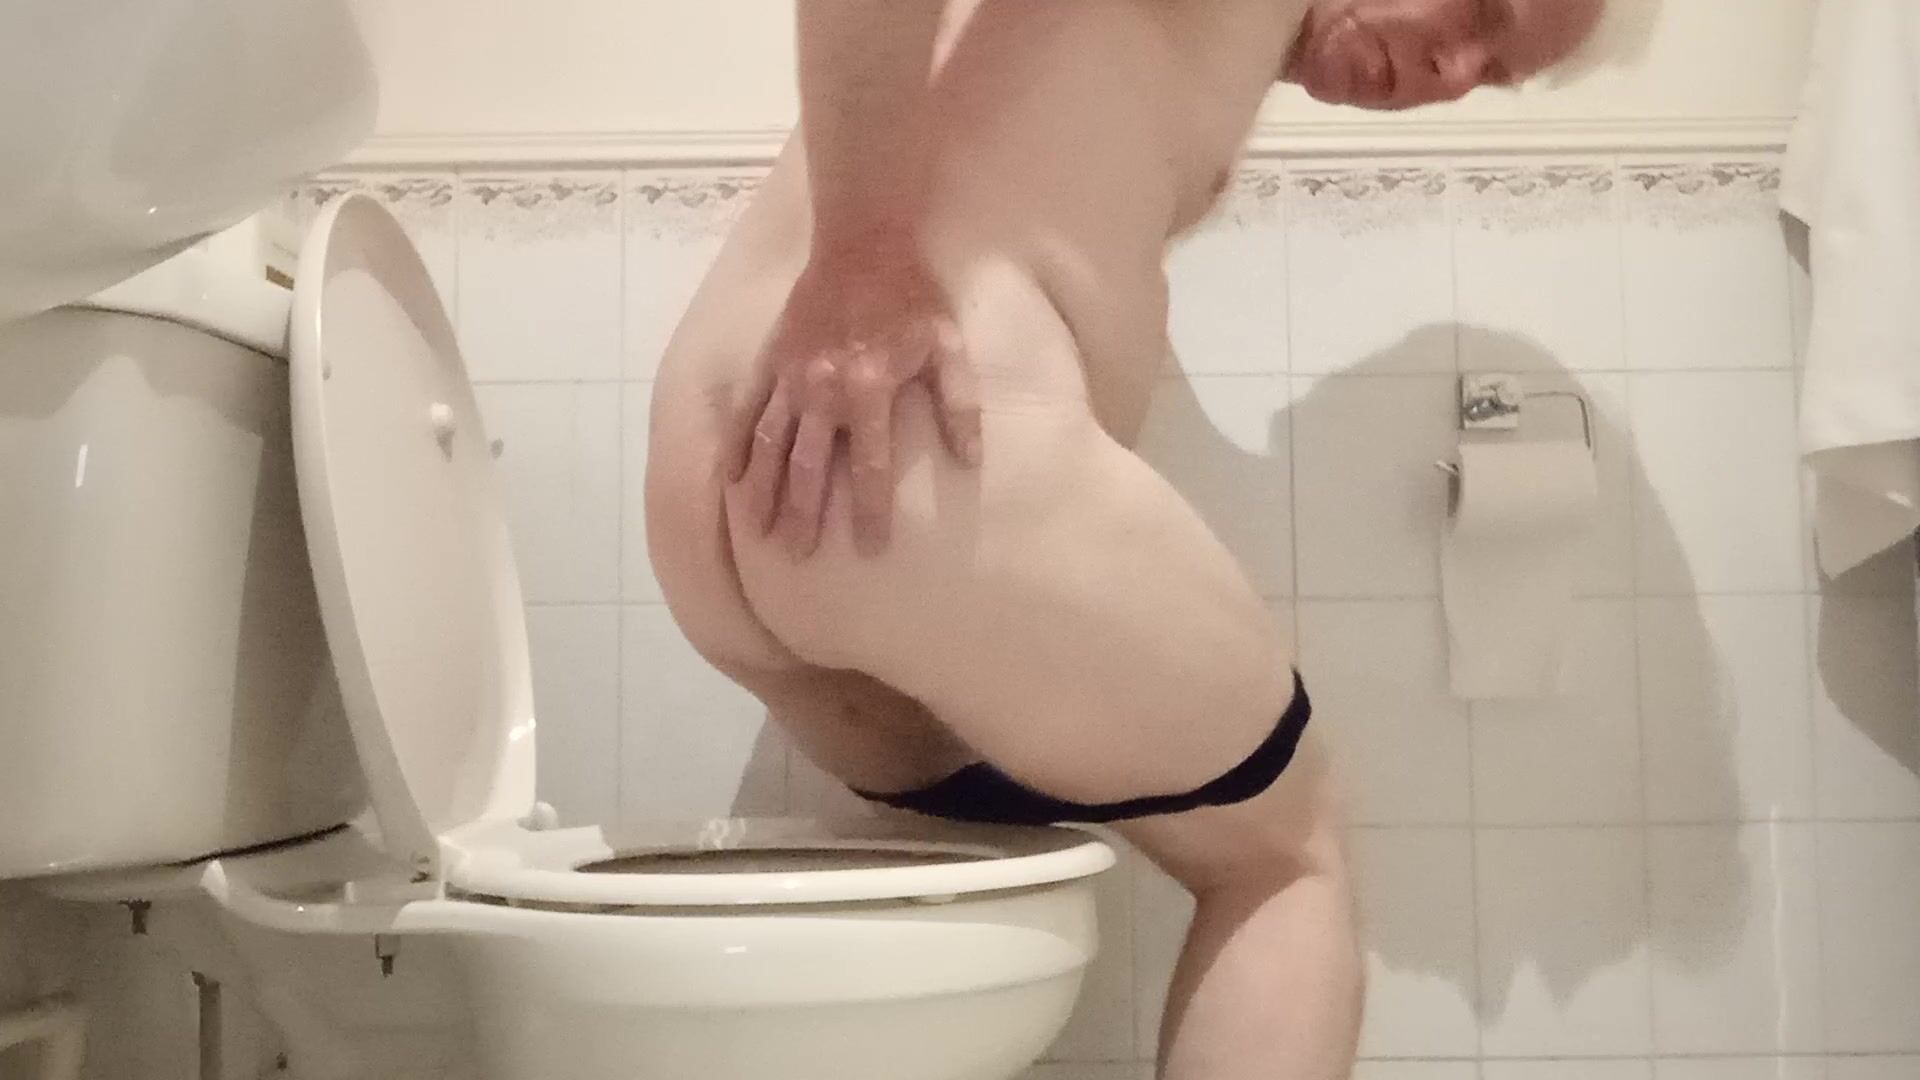 Dirtybottompooboy Naked Doing Poopoo